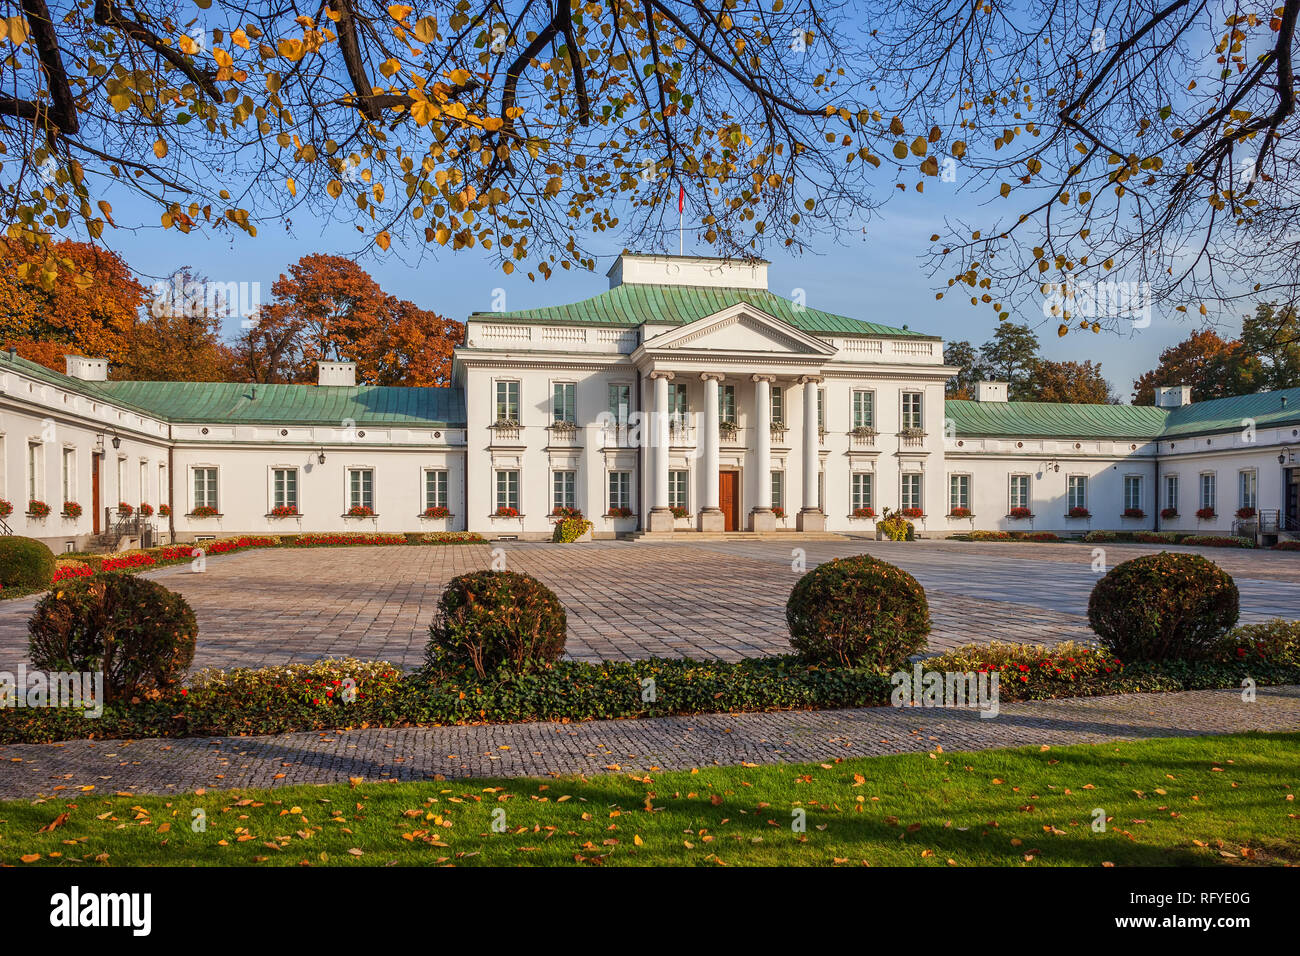 Belweder Palace in Warsaw, Poland, classical style building, former official residence of the Polish presidents. Stock Photo